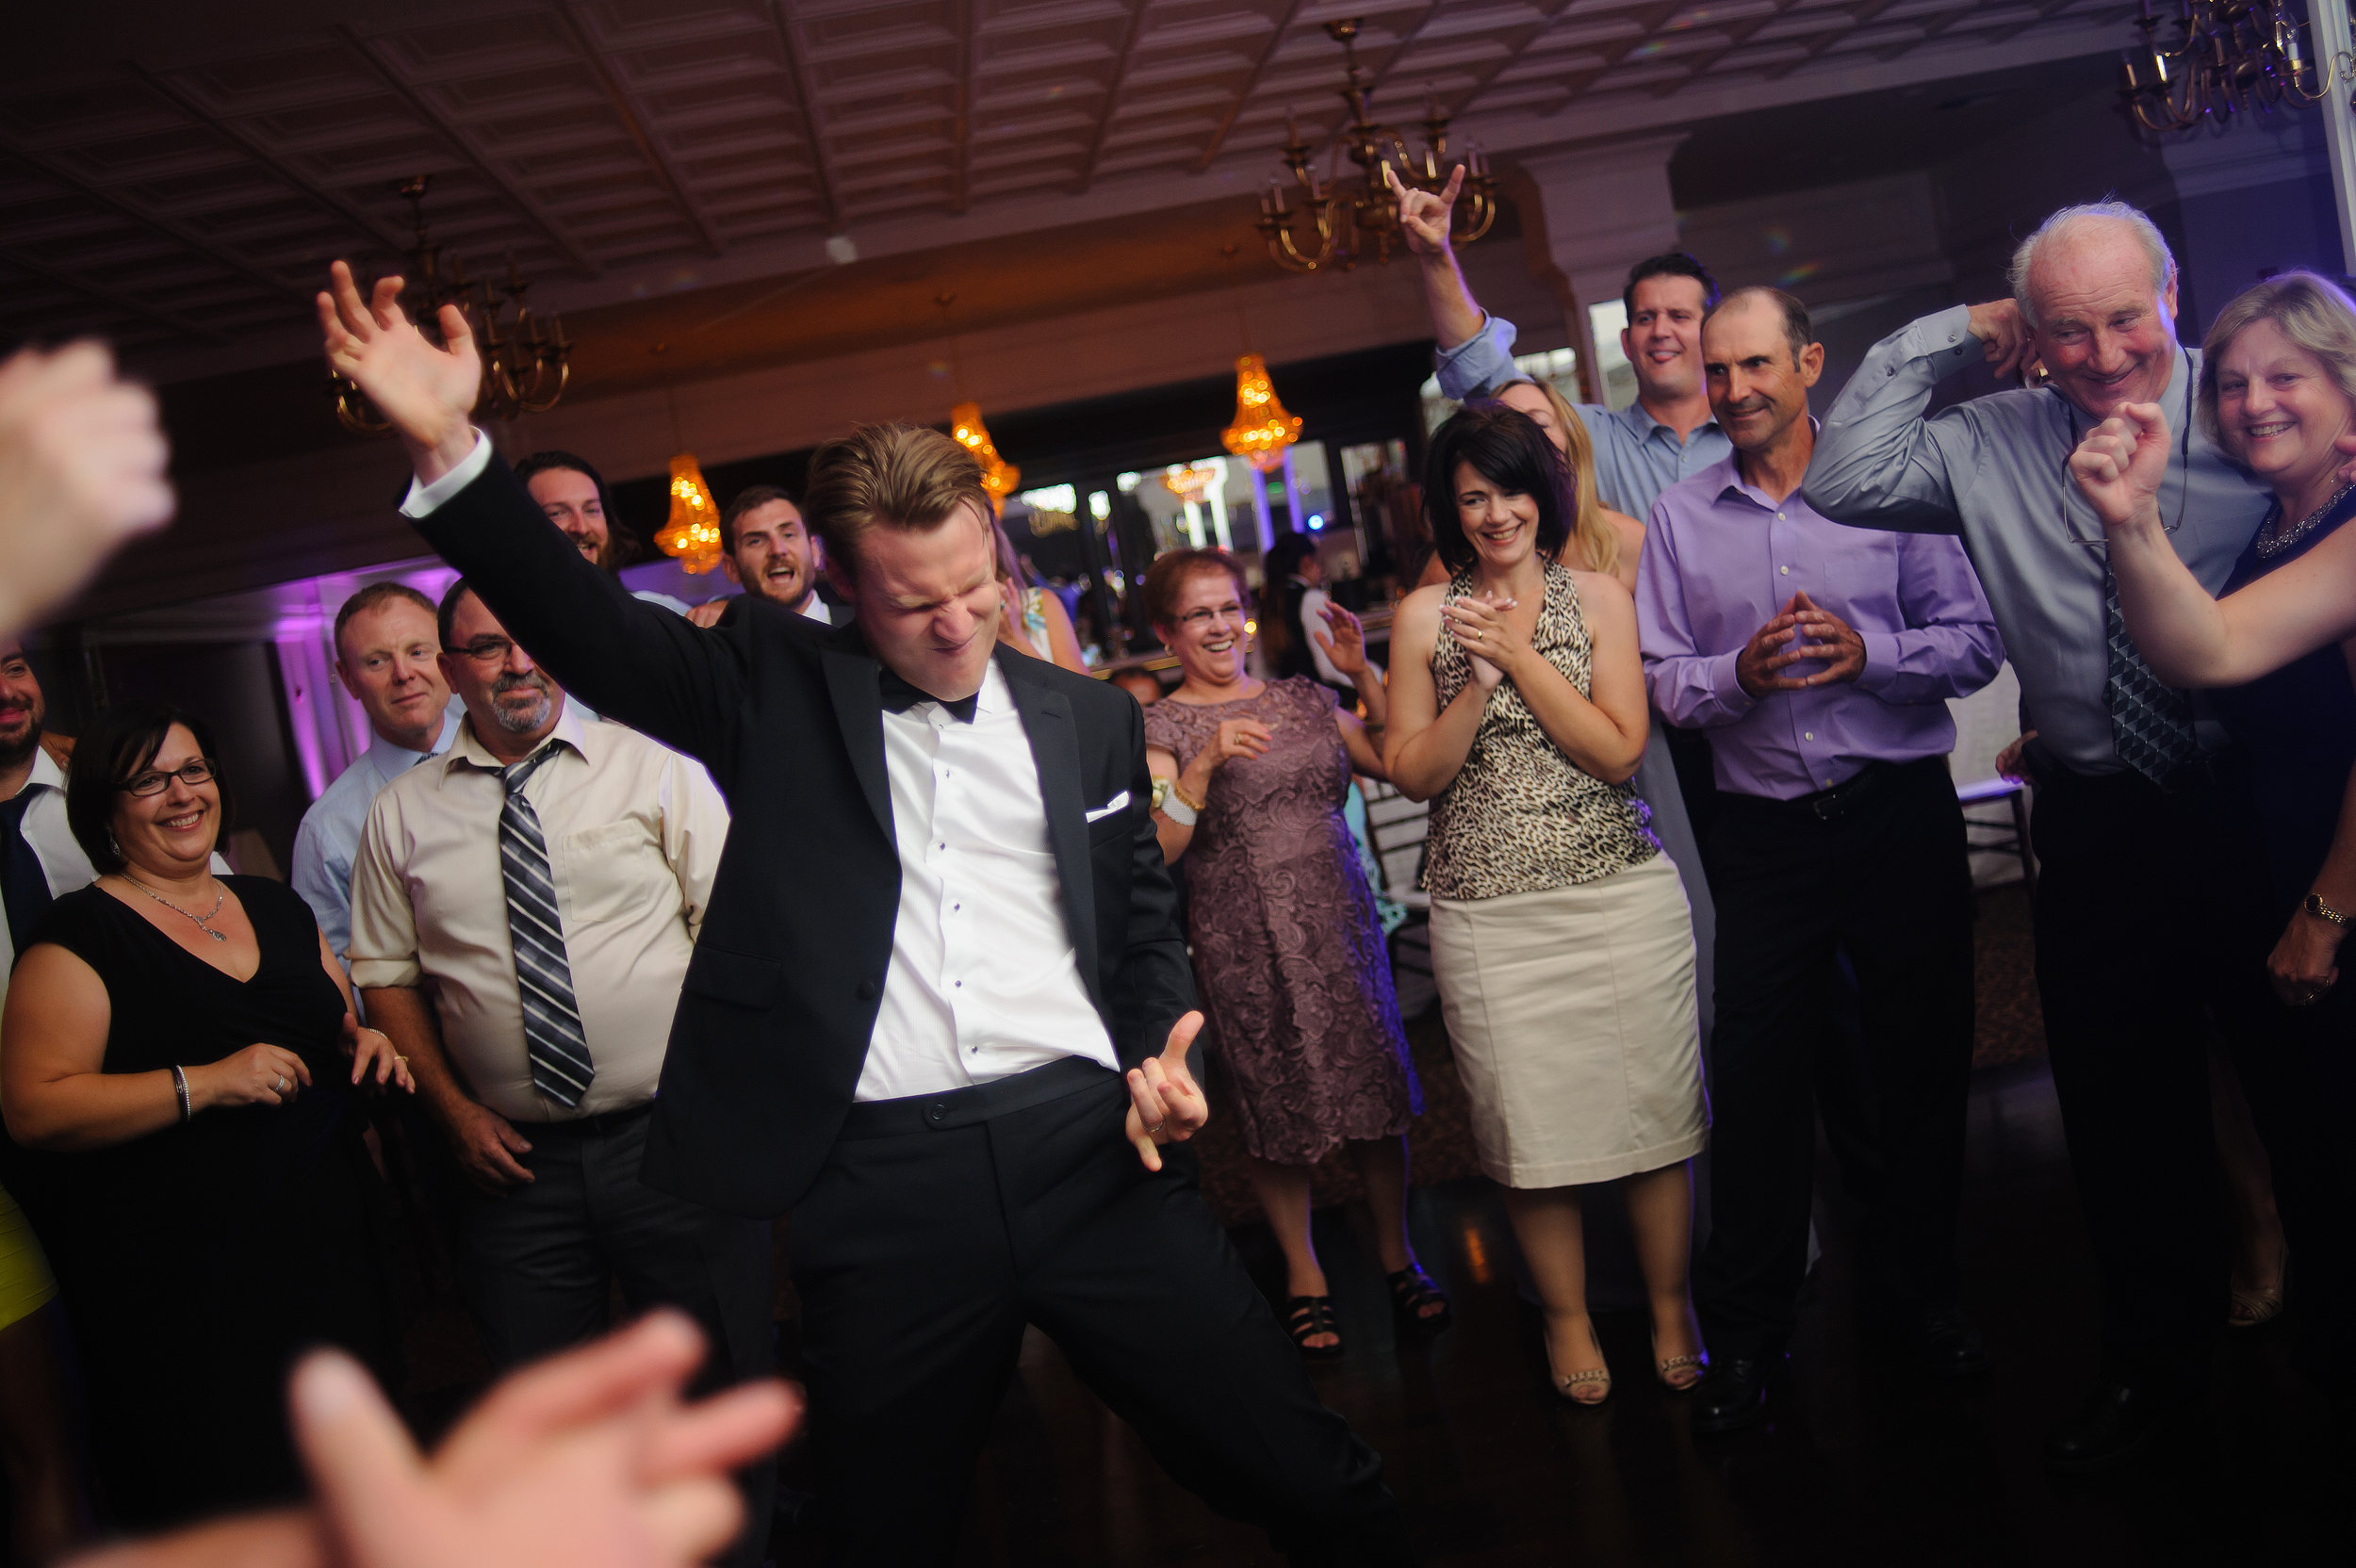  Groom dancing at reception during wedding at Arden Hills Club and Spa in Sacramento California. 